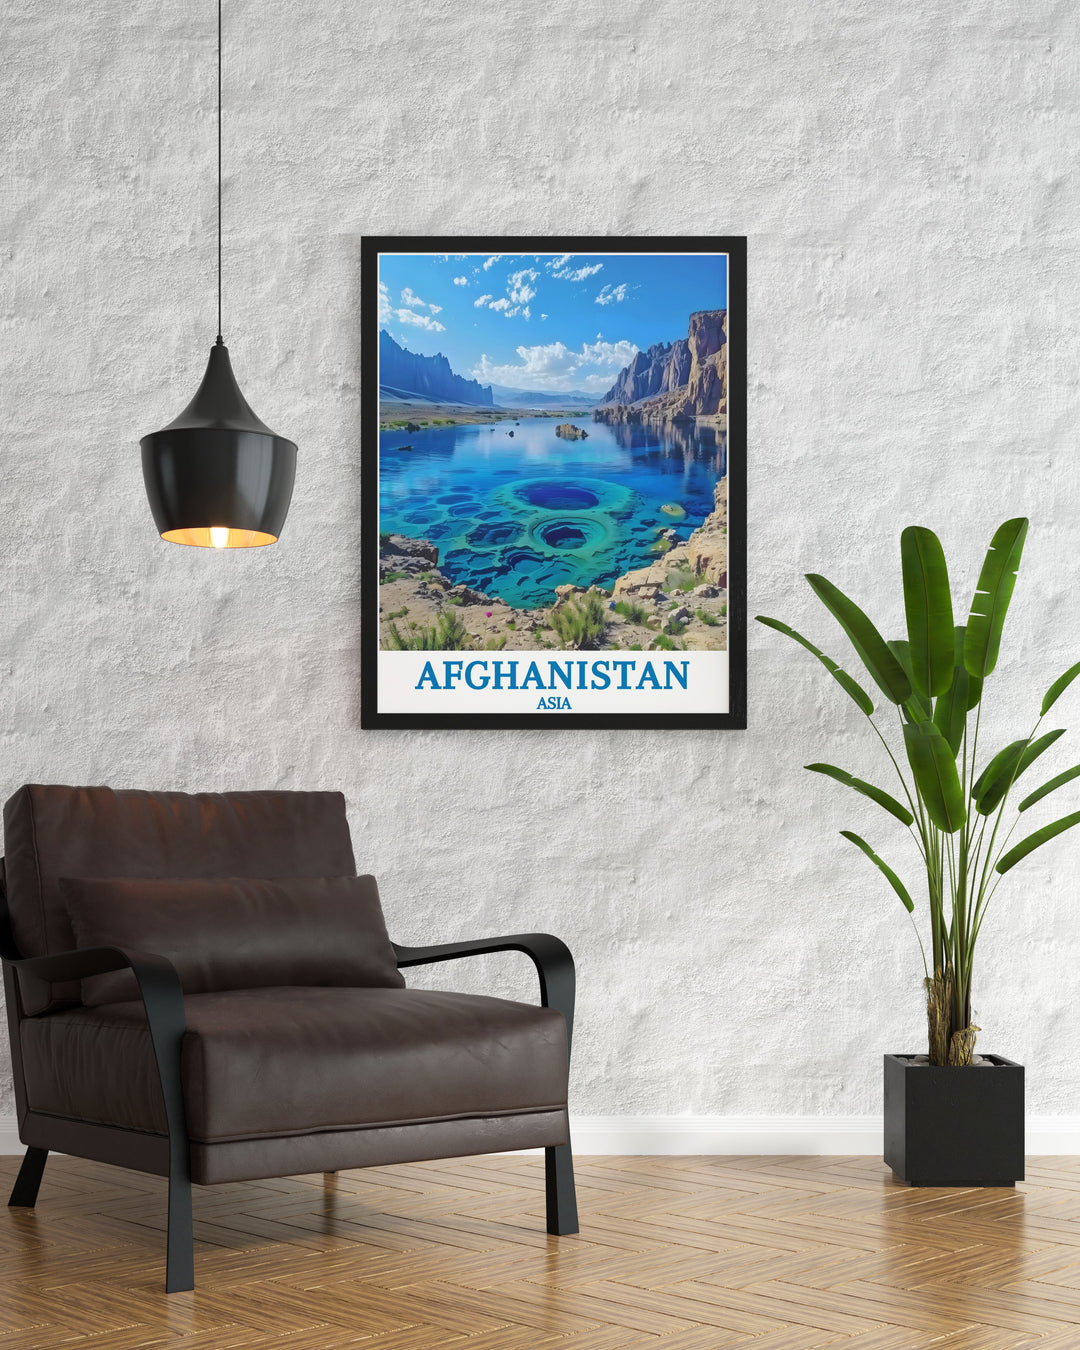 Experience the majestic Band e Amir National Park through this Afghanistan Wall Art adding a touch of natural elegance to your living space ideal for any decor style and as unique anniversary gifts